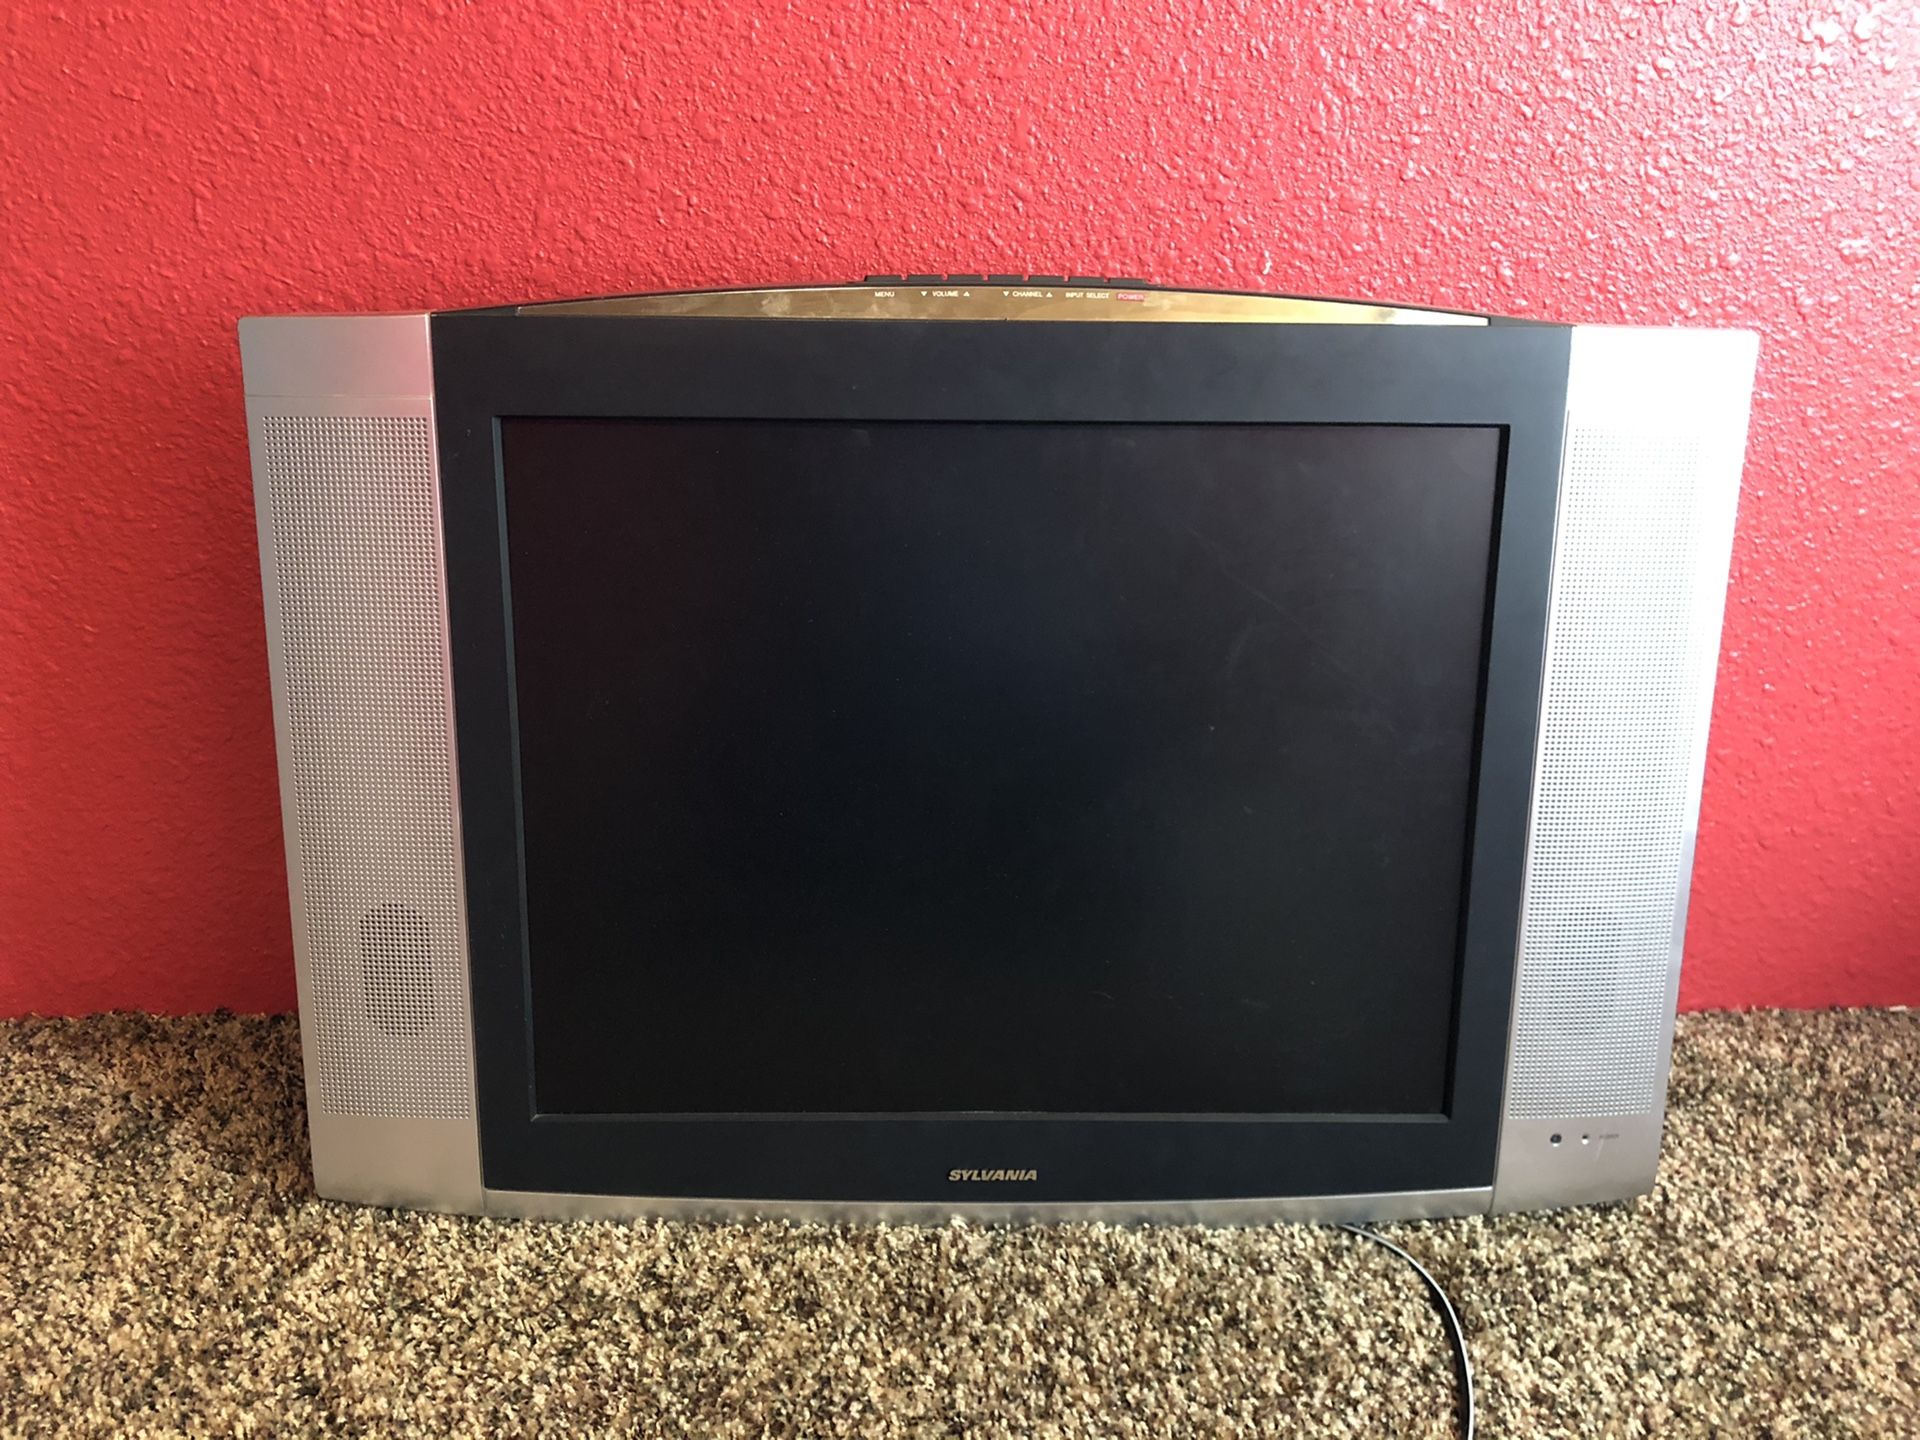 Sylvania 20 in lcd tv with remote